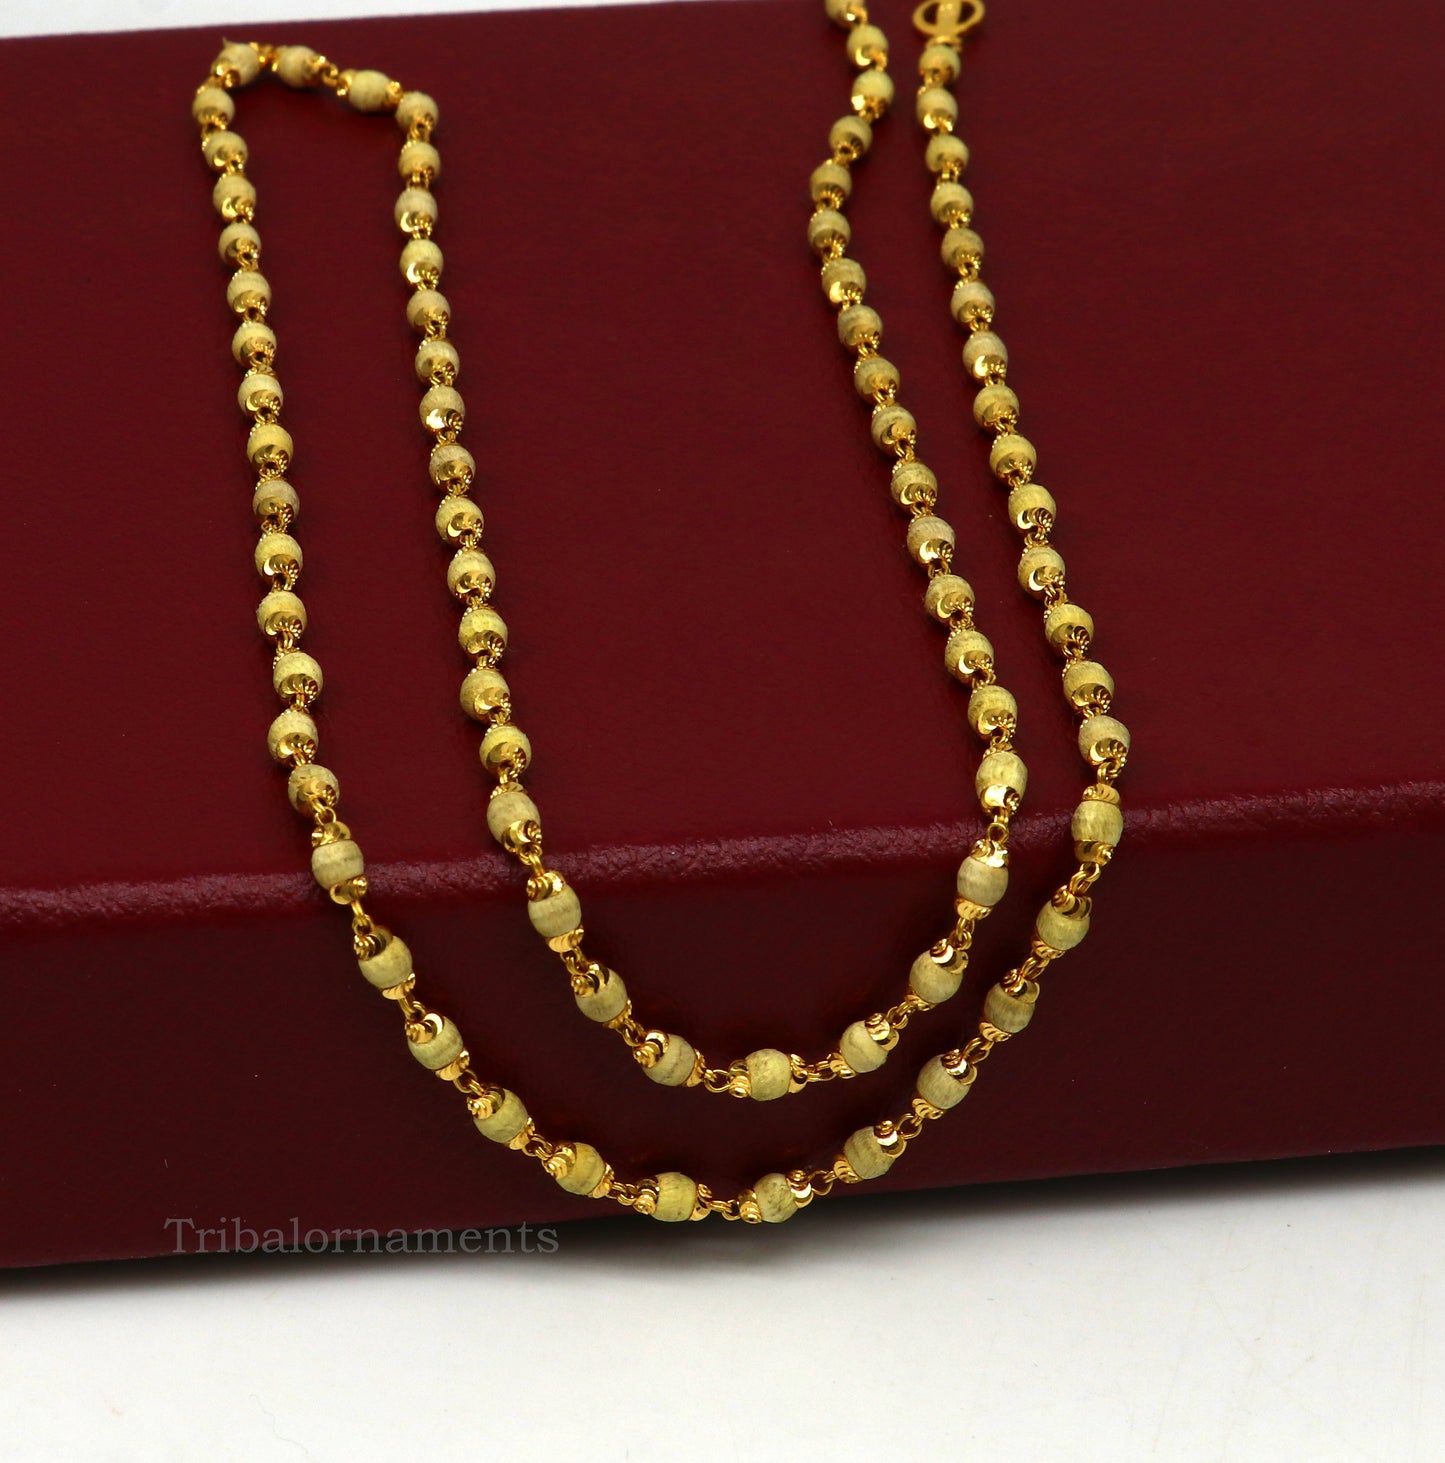 22kt yellow gold 3mm basil rosary(tulsi) chain necklace, Gorgeous customized beaded chain, excellent wedding gifting jewelry ch264 - TRIBAL ORNAMENTS